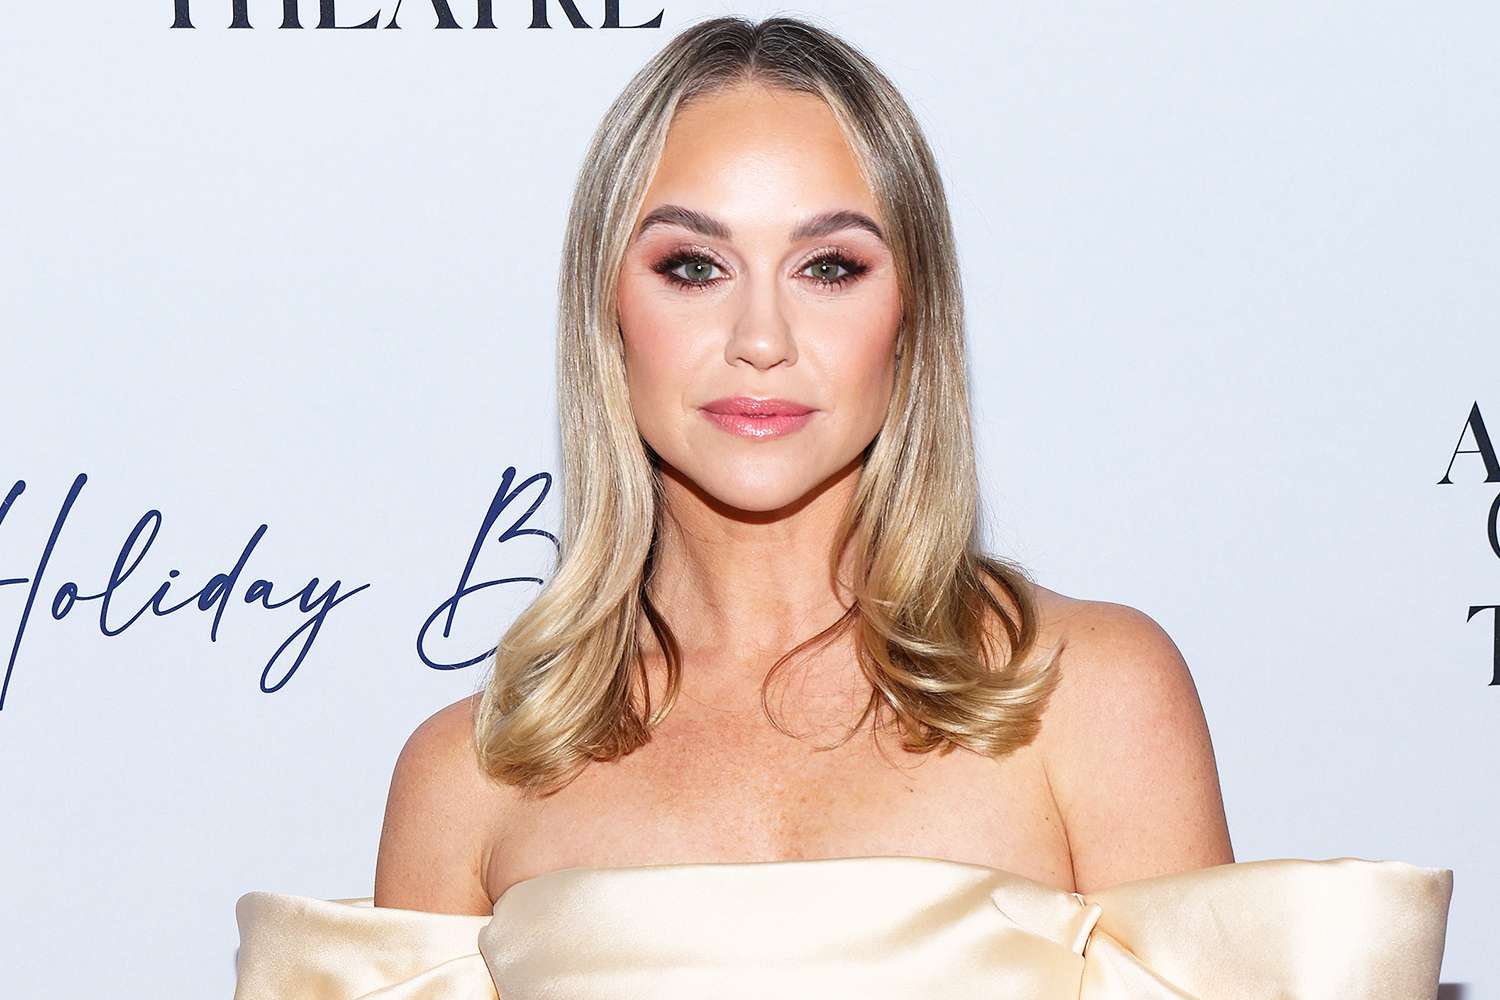 “Glee”'s Becca Tobin Jokes to Former Costars About Being 'So Irrelevant' Post-Show: 'Where Is My Next Hit?'